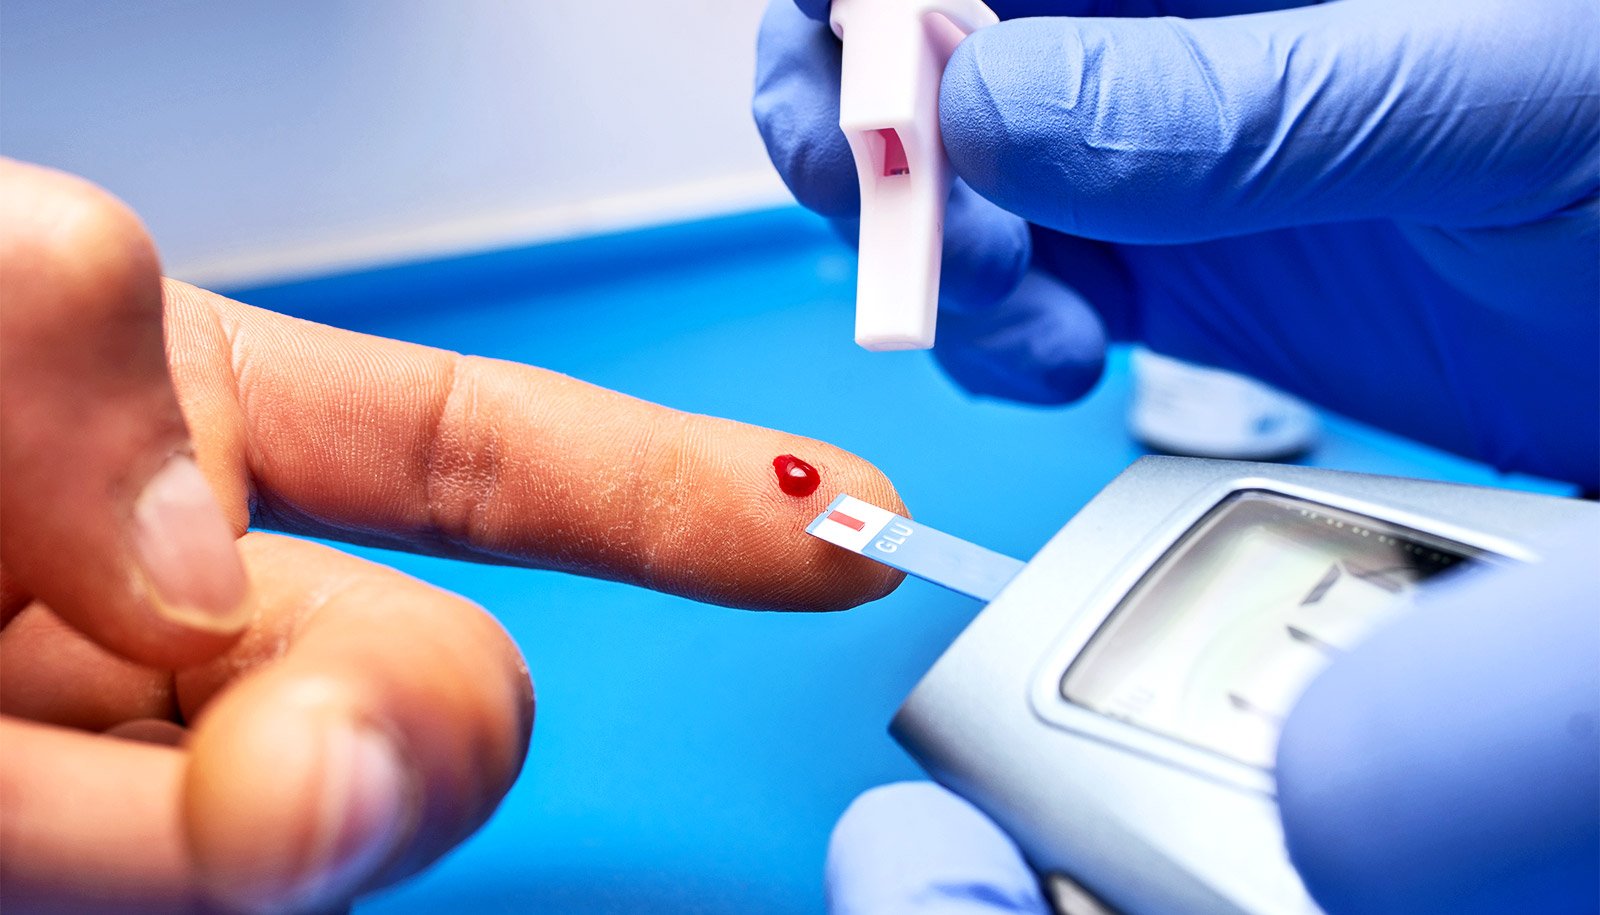 Sensors and AI spot low blood sugar without needles